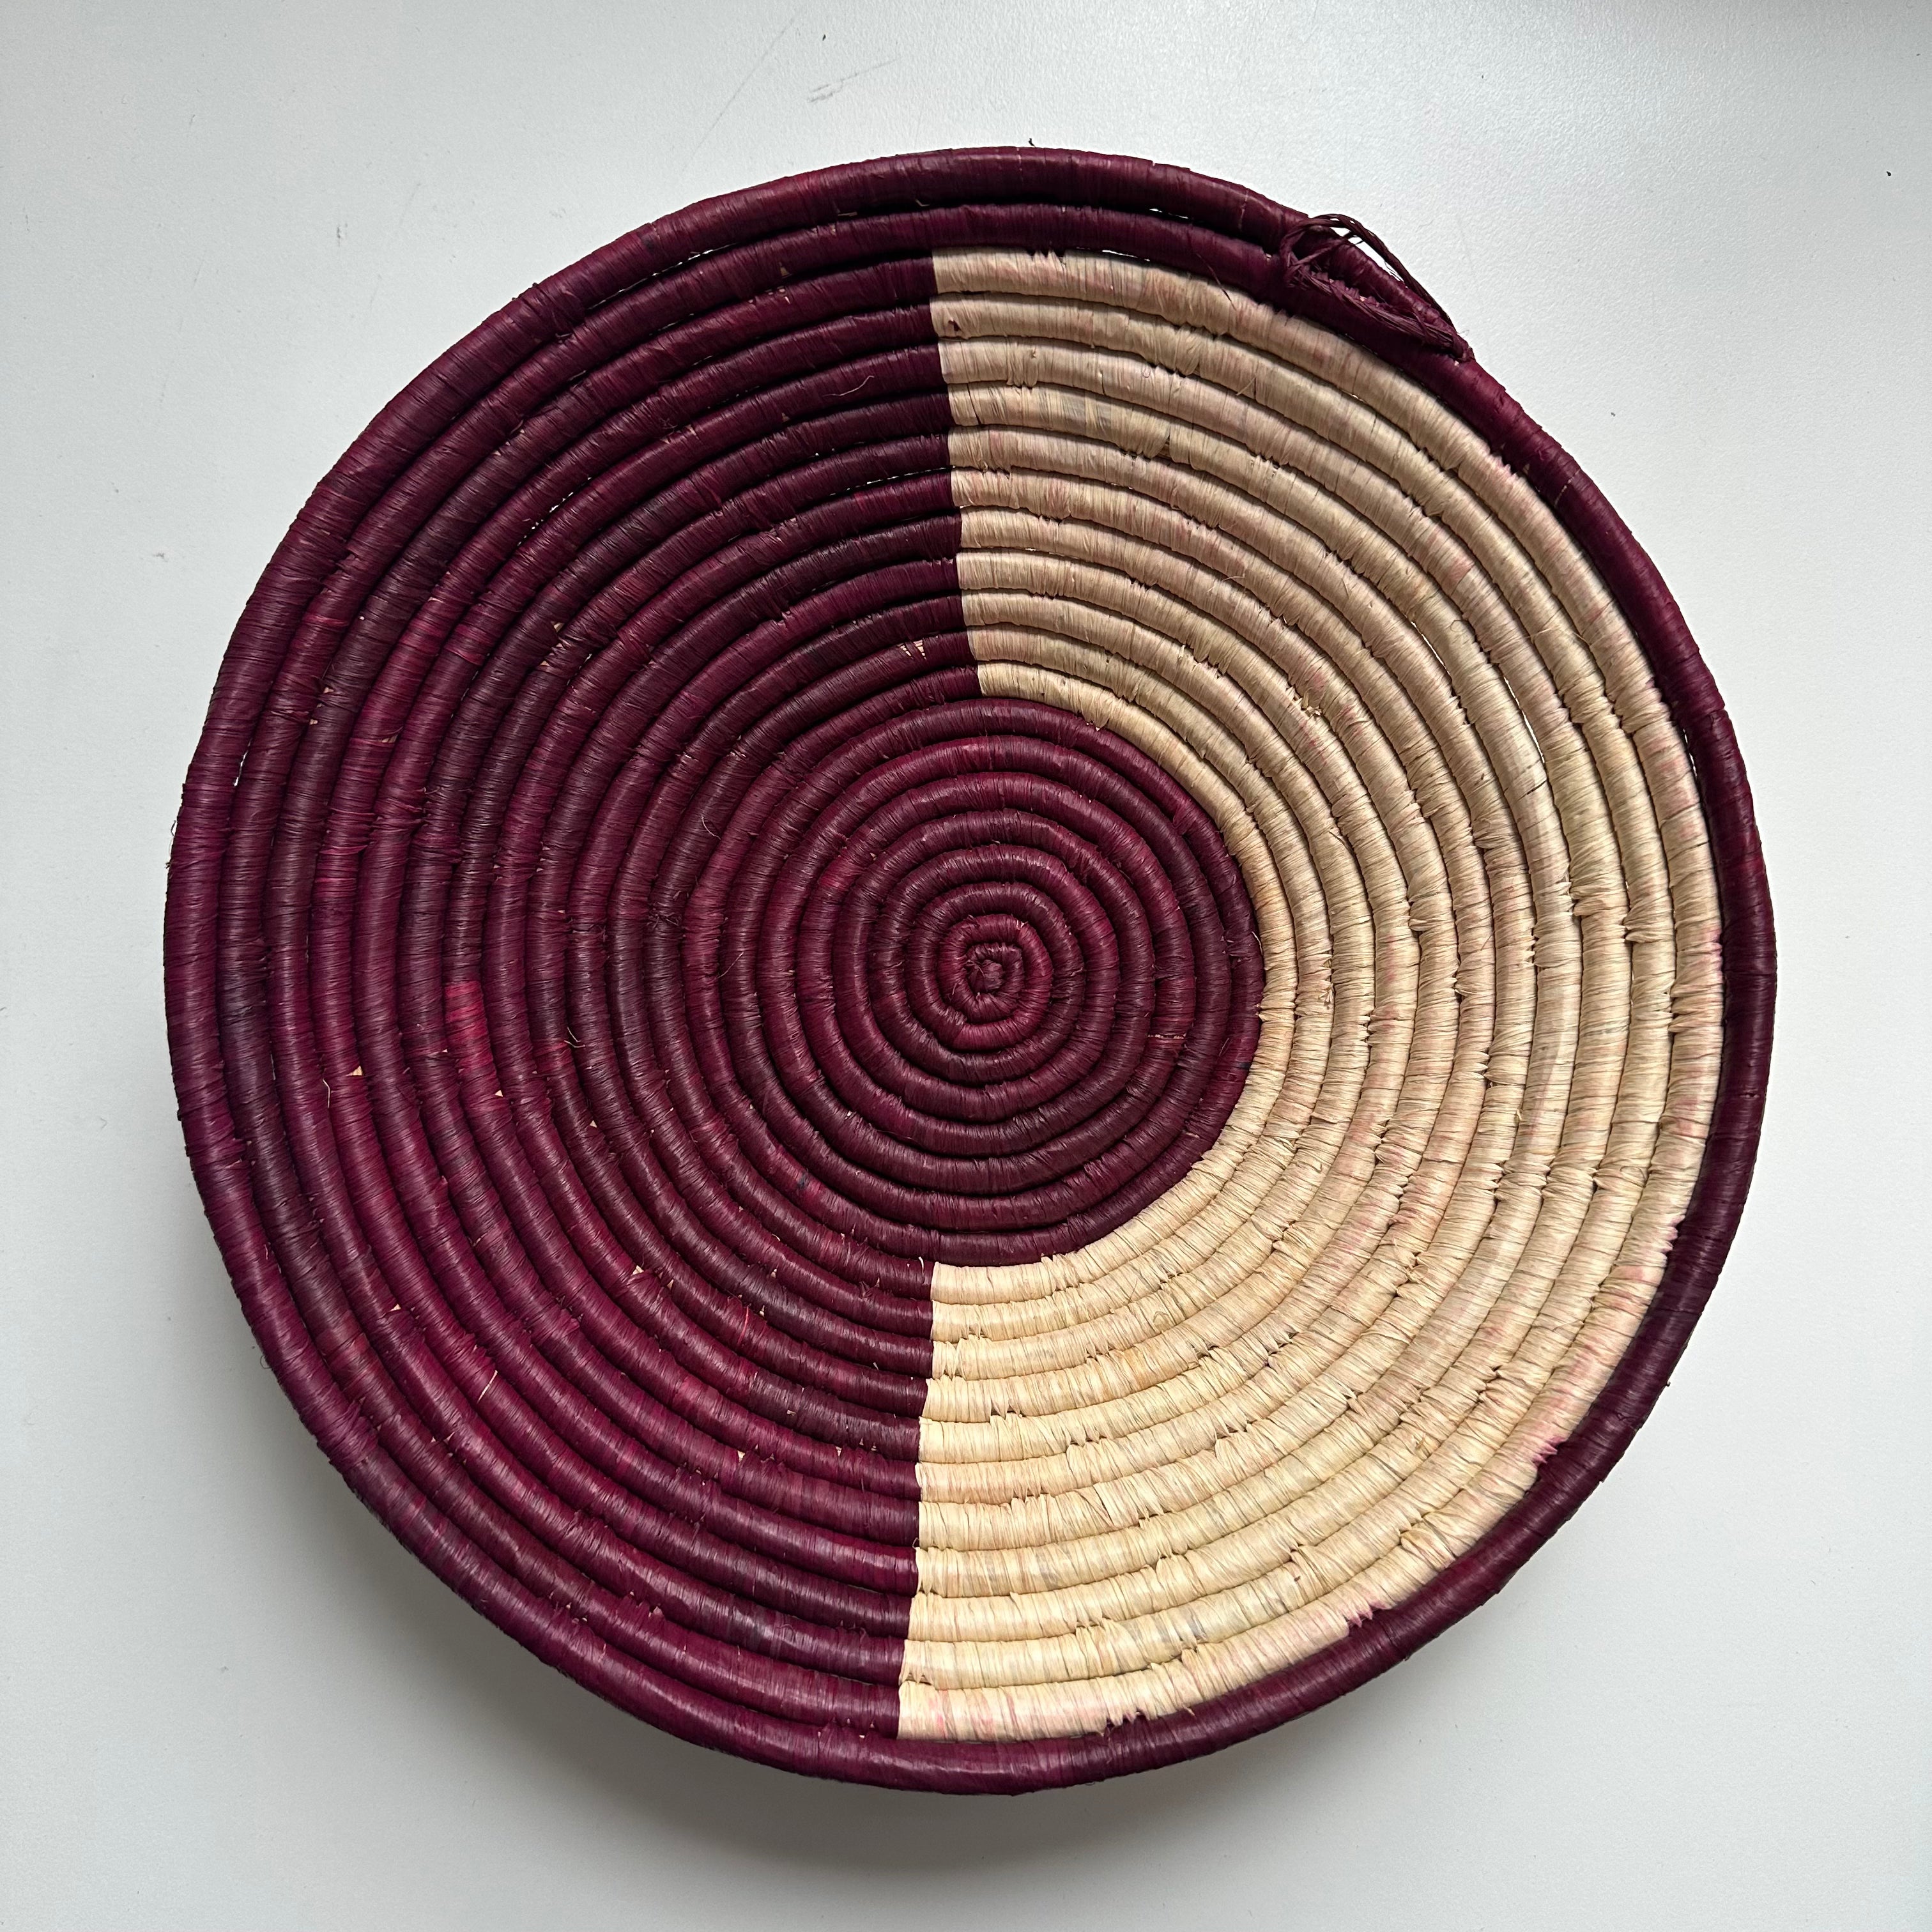 The display of burgundy and natural color handwoven bowl